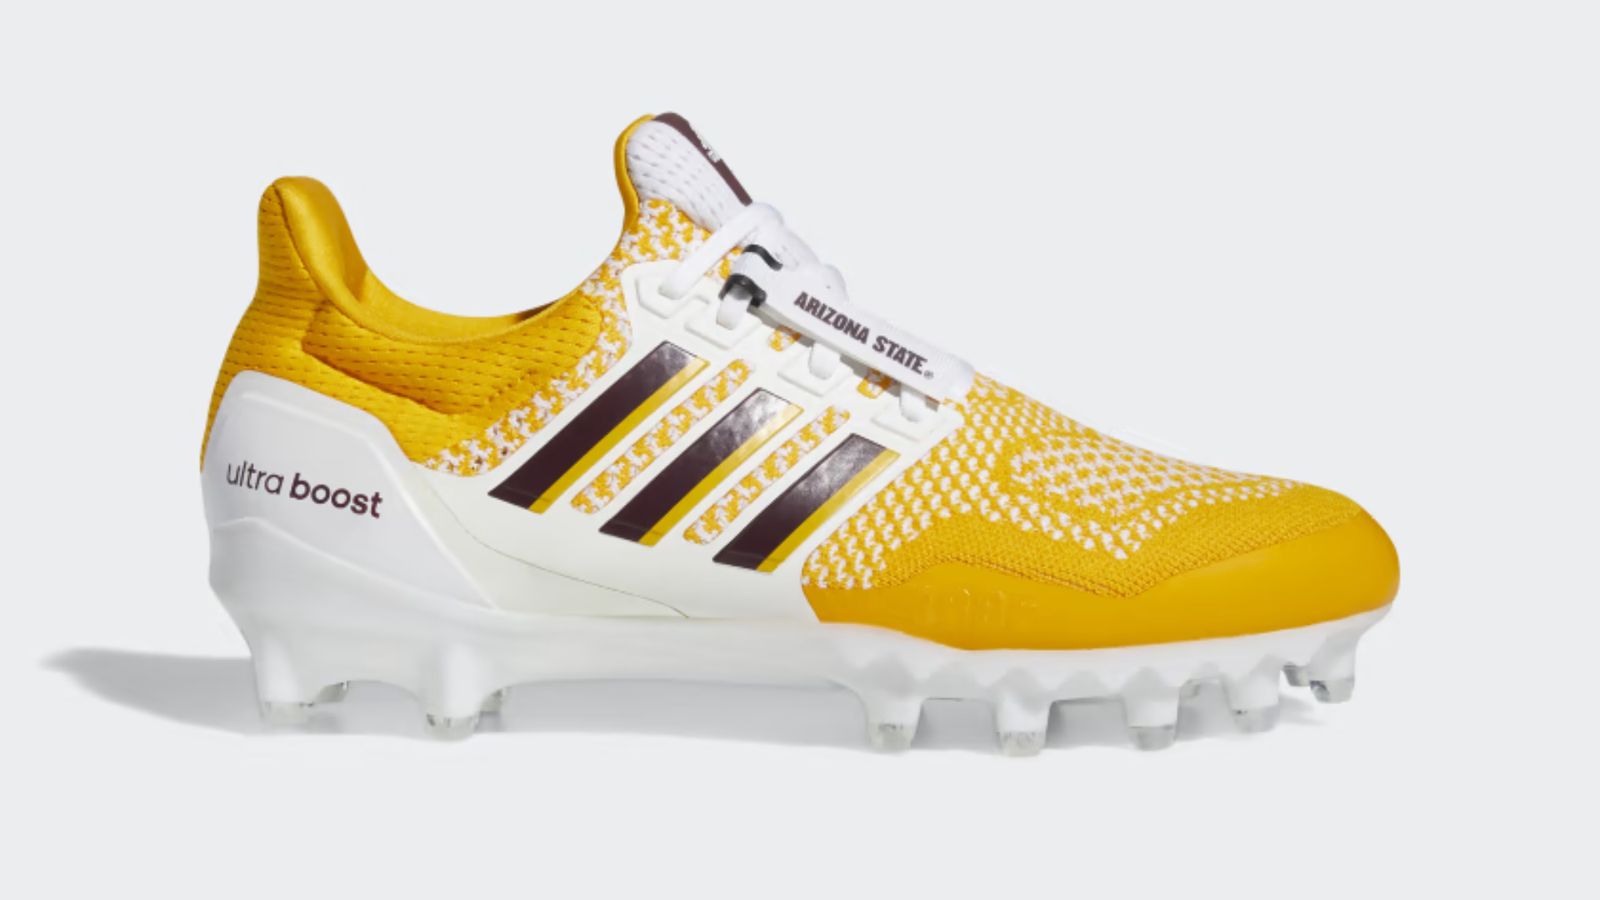 adidas Ultraboost 1.0 product image of a yellow fabric cleat featuring white TPU overlays and maroon details.